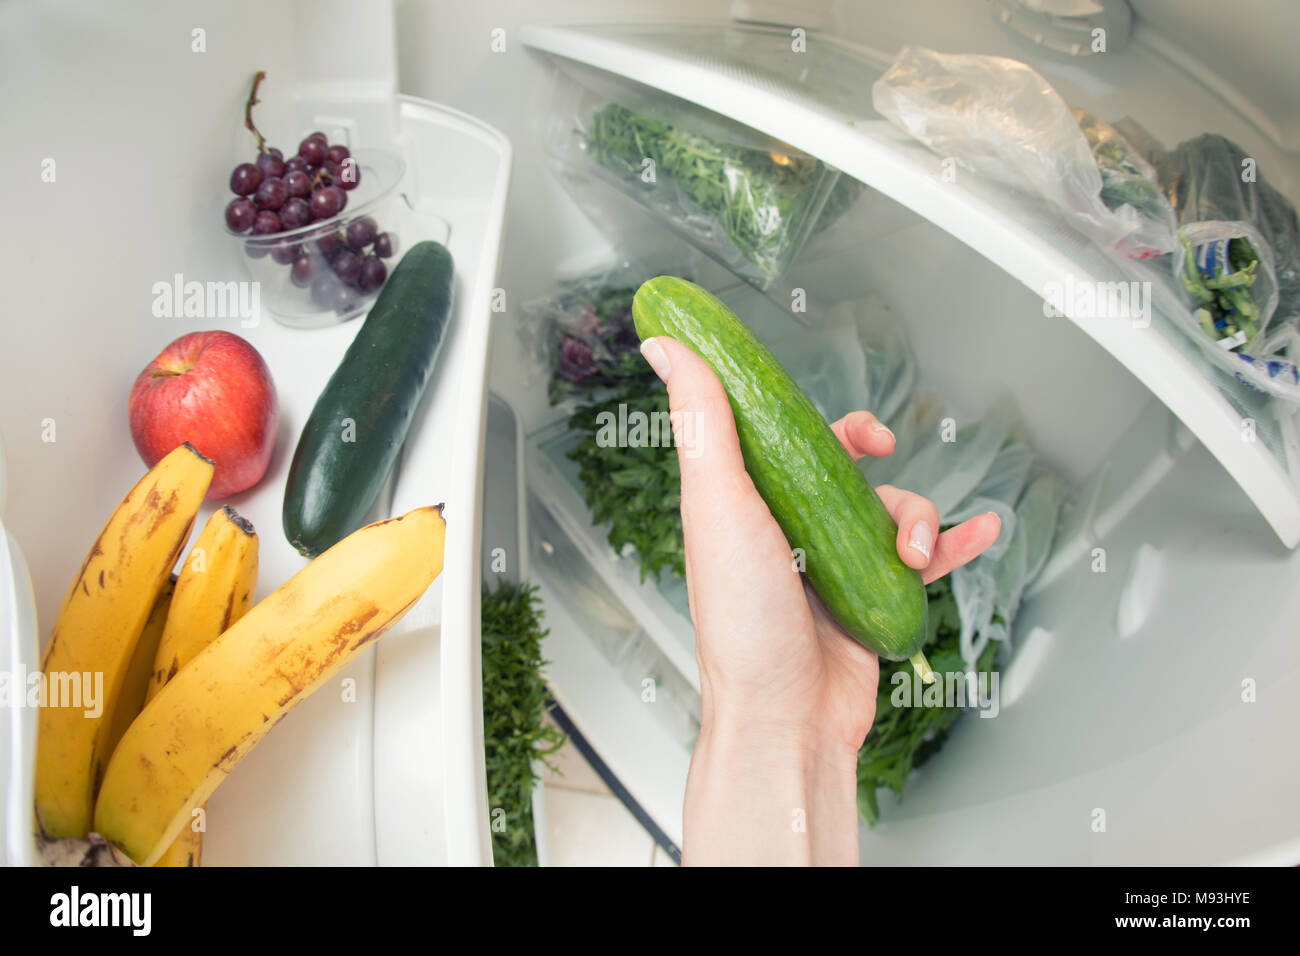 Healthy diet: A hand grabbing a cucumber from the open refrigerator full of greens. Stock Photo